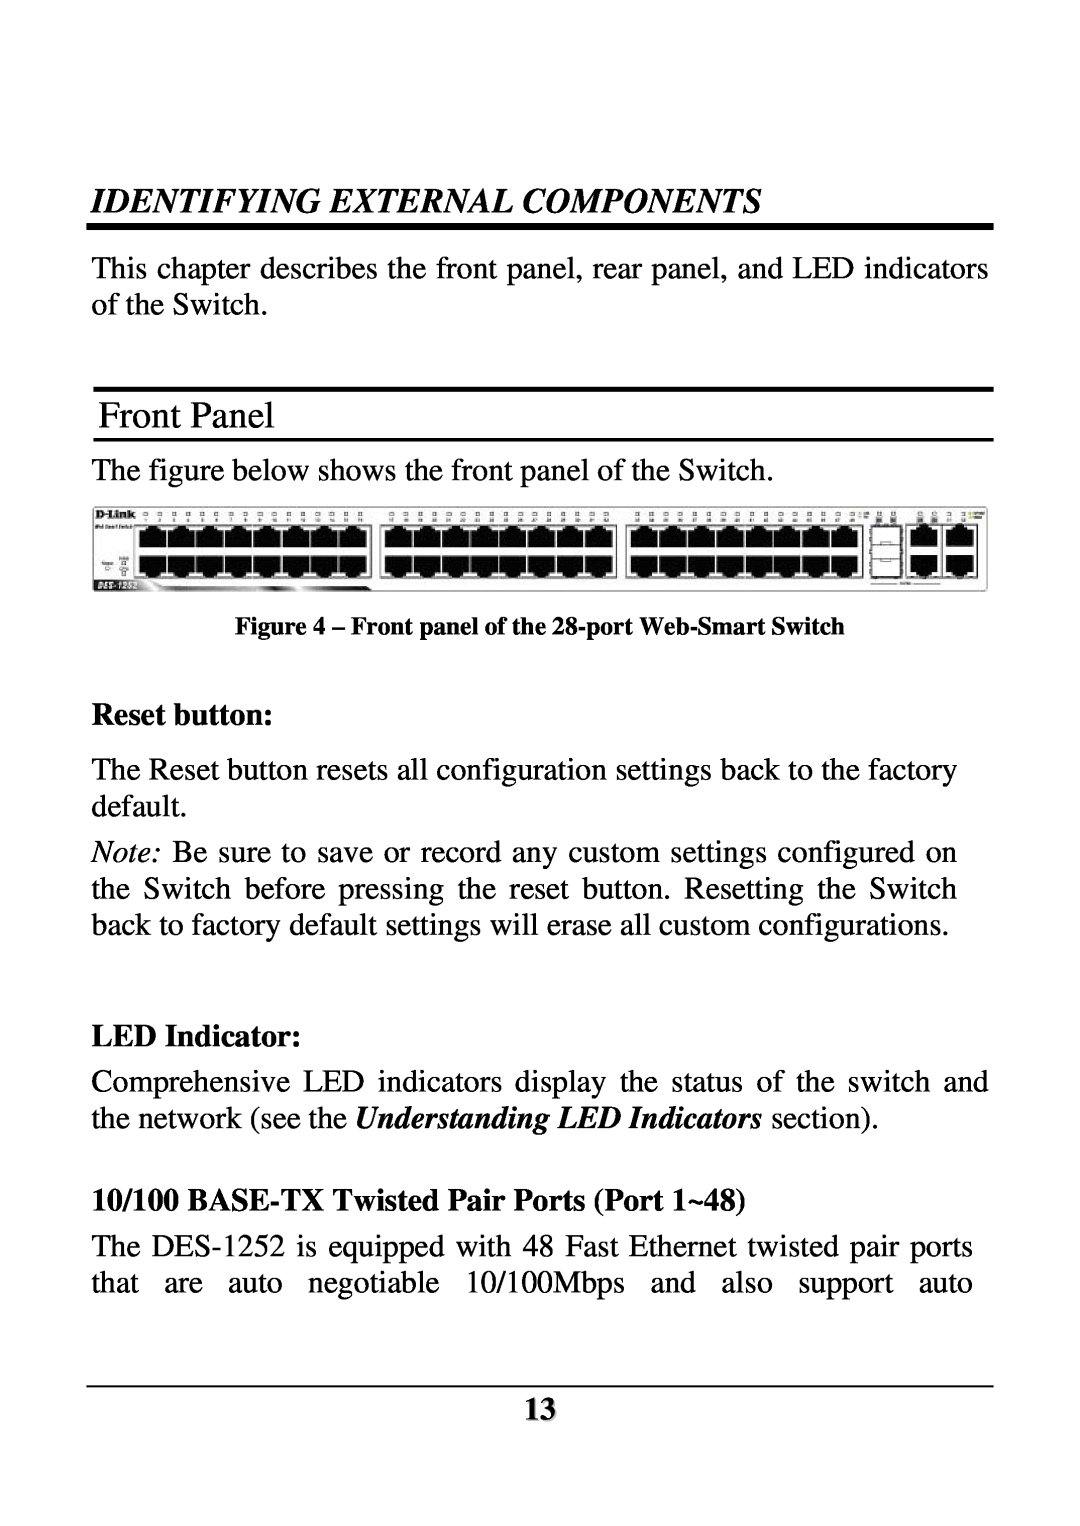 D-Link DES-1252 user manual Front Panel, Identifying External Components, Reset button, LED Indicator 